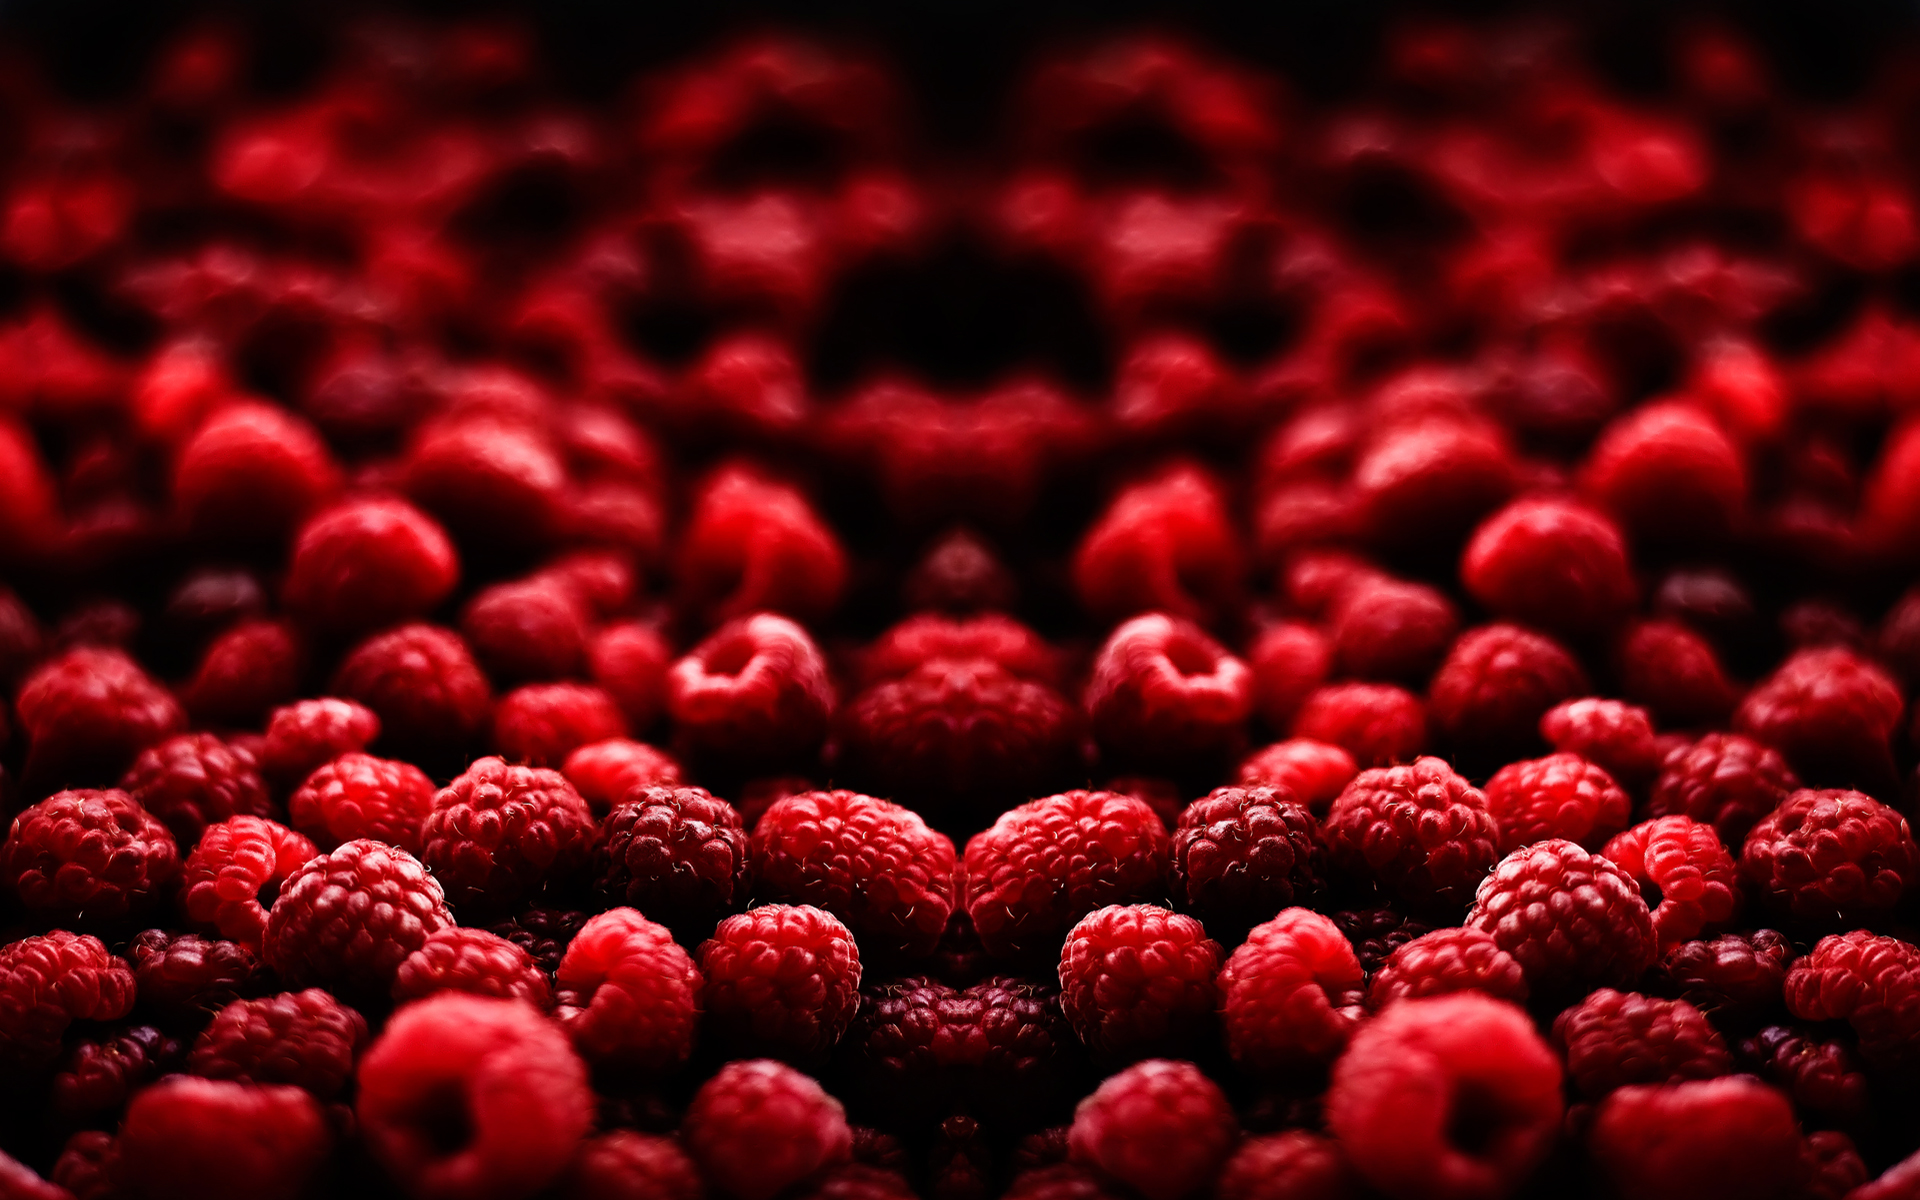 Awesome Red Cherry Fruits Wallpaper Download #5380 Wallpaper | High ...